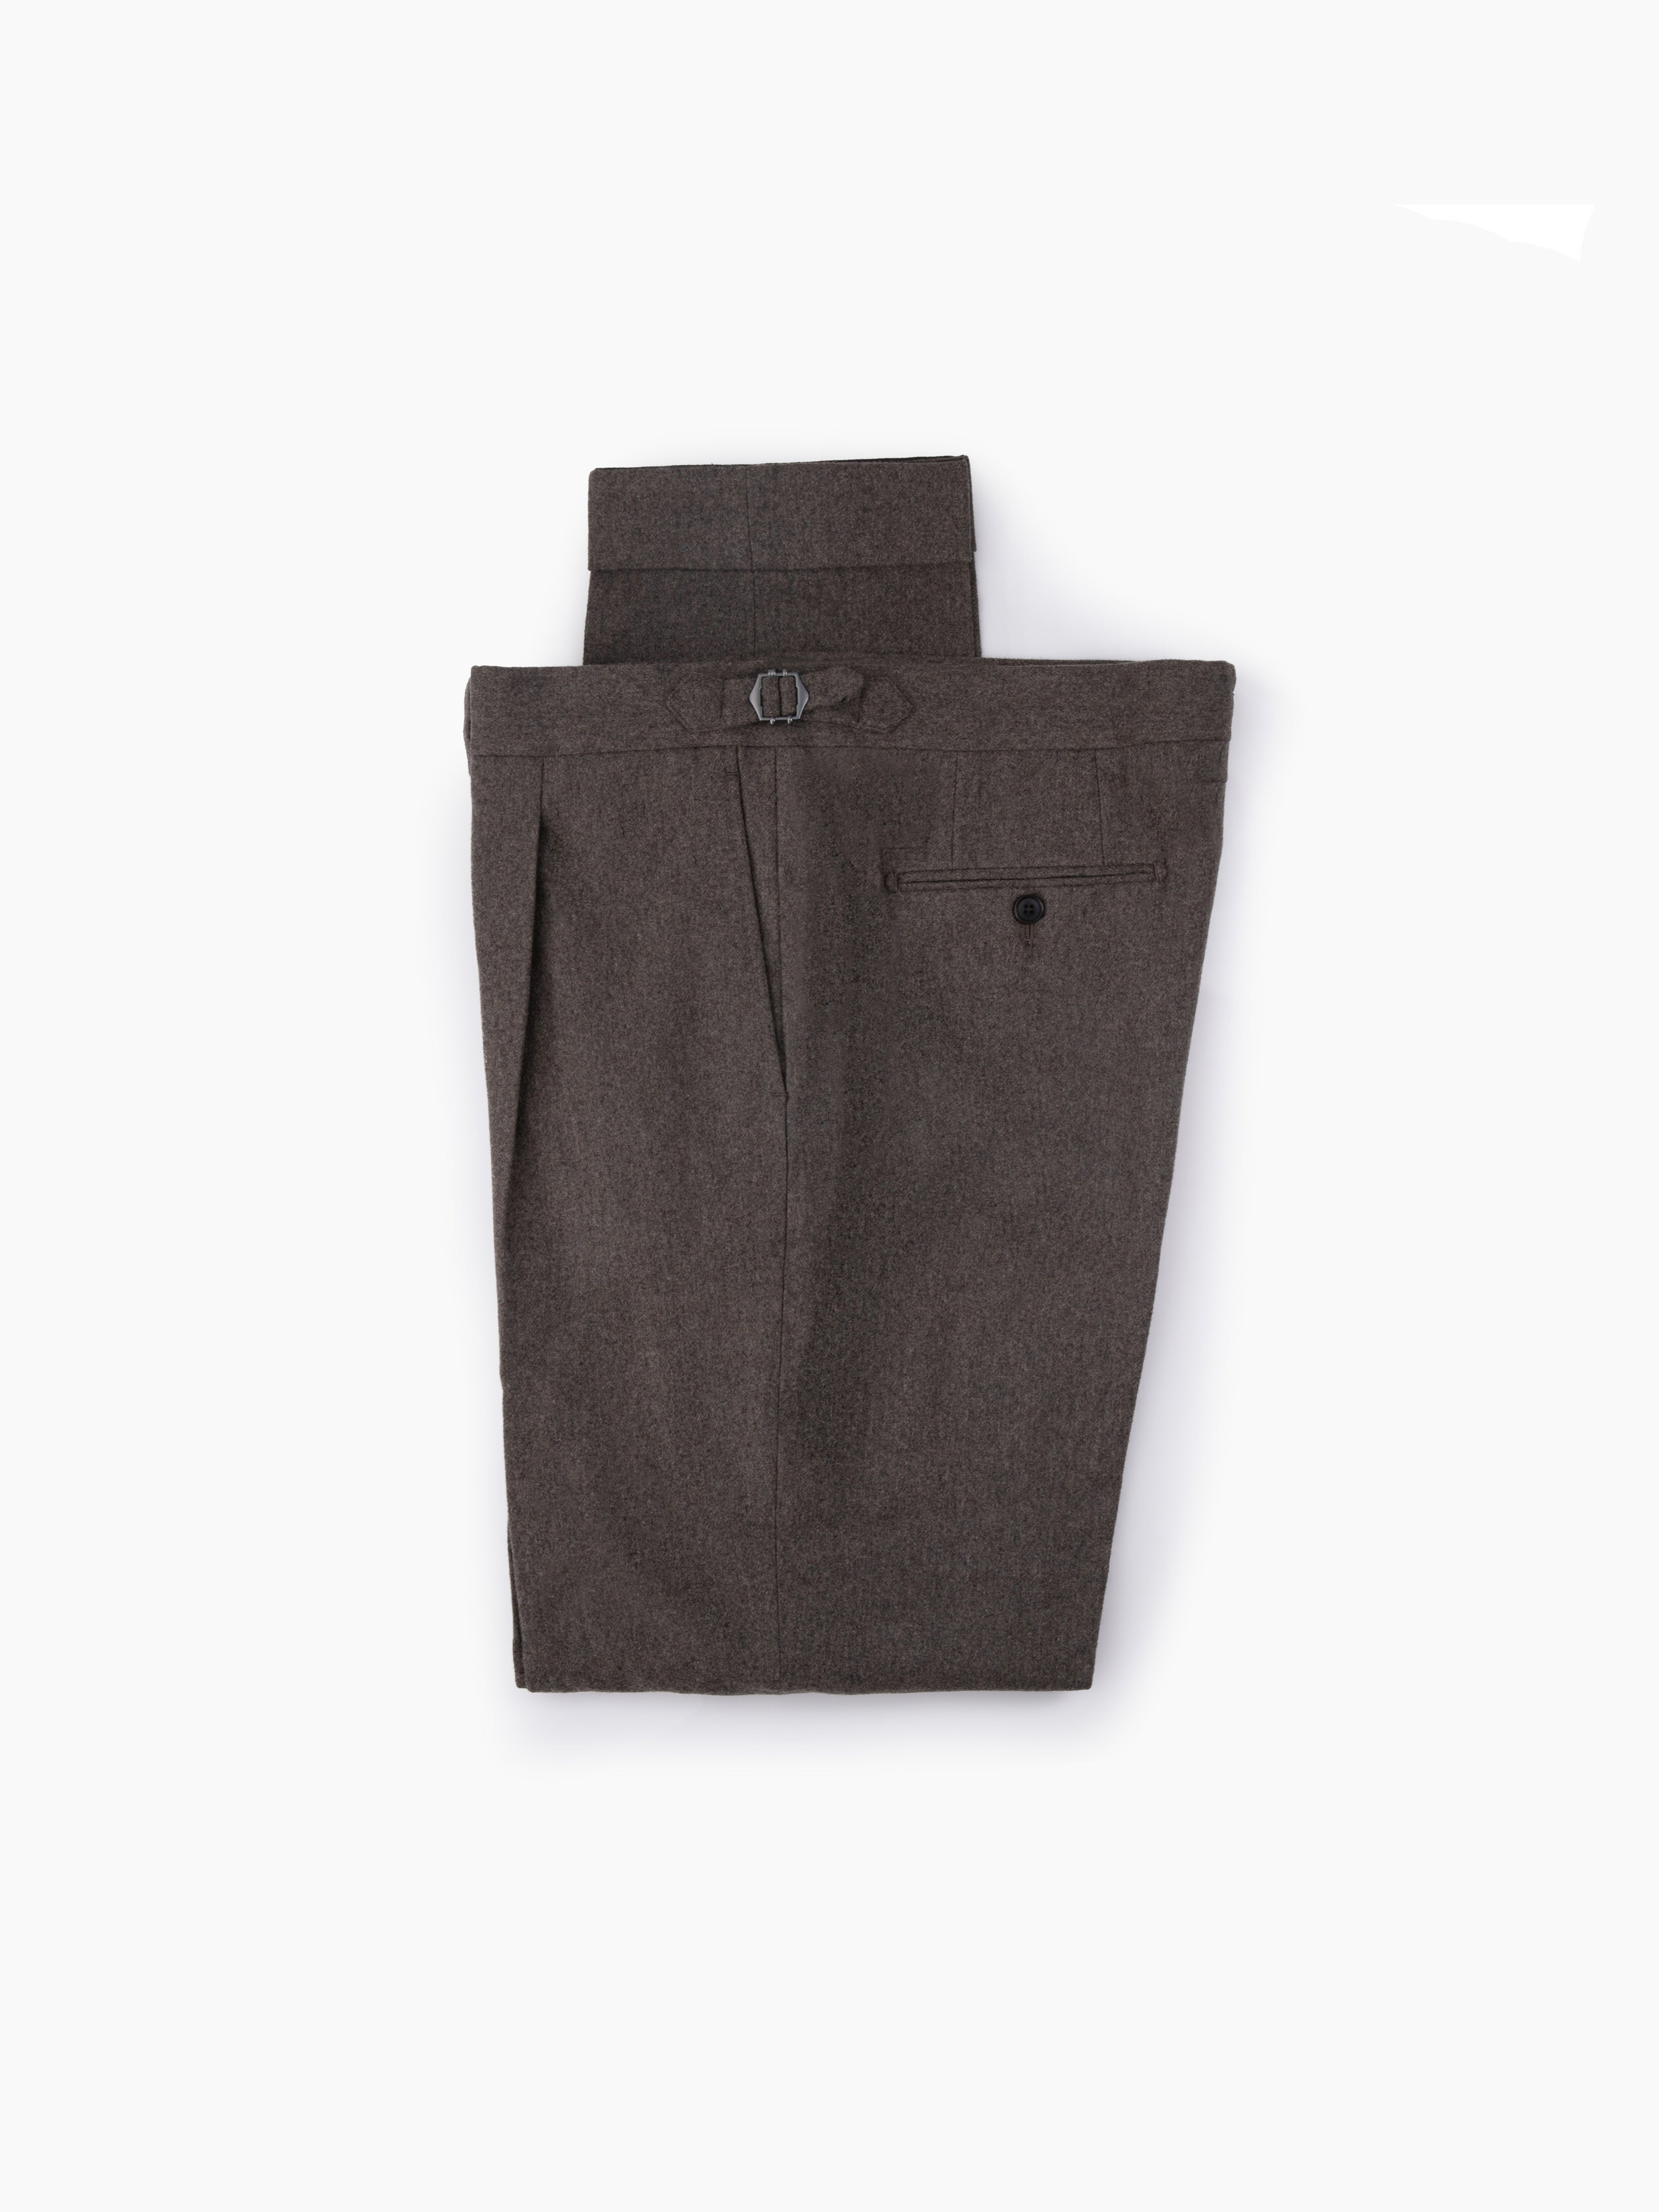 Trousers | Tailored with passion to the craft | Grand Le Mar®